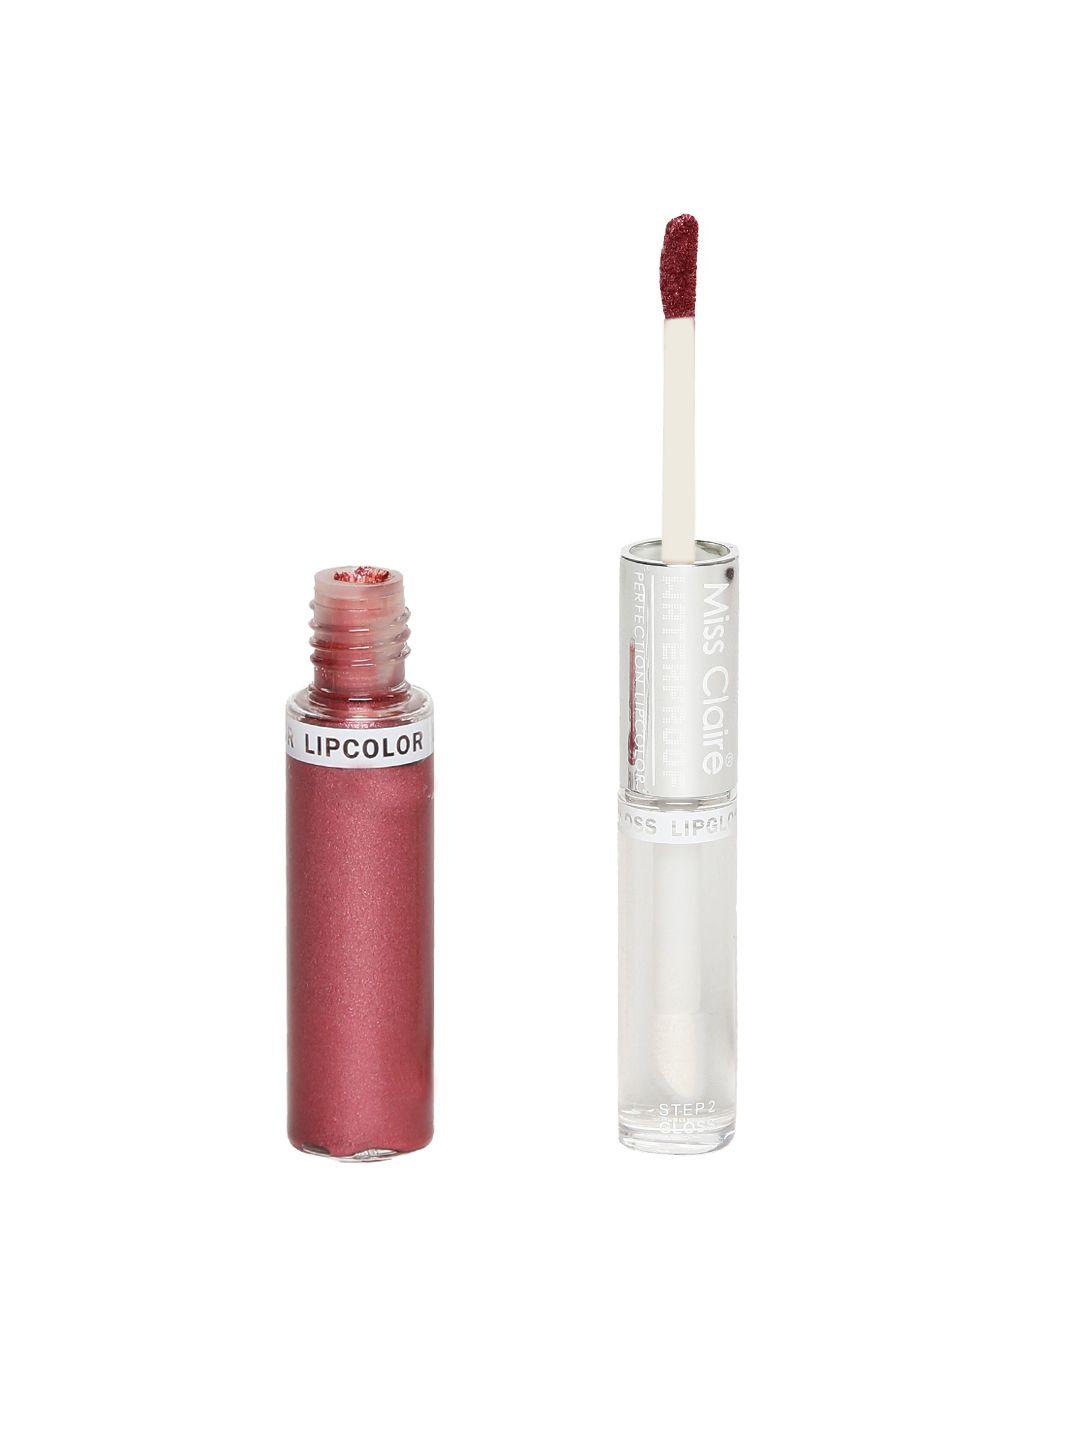 miss claire 25 waterproof perfection lip color & lip gloss 10 ml